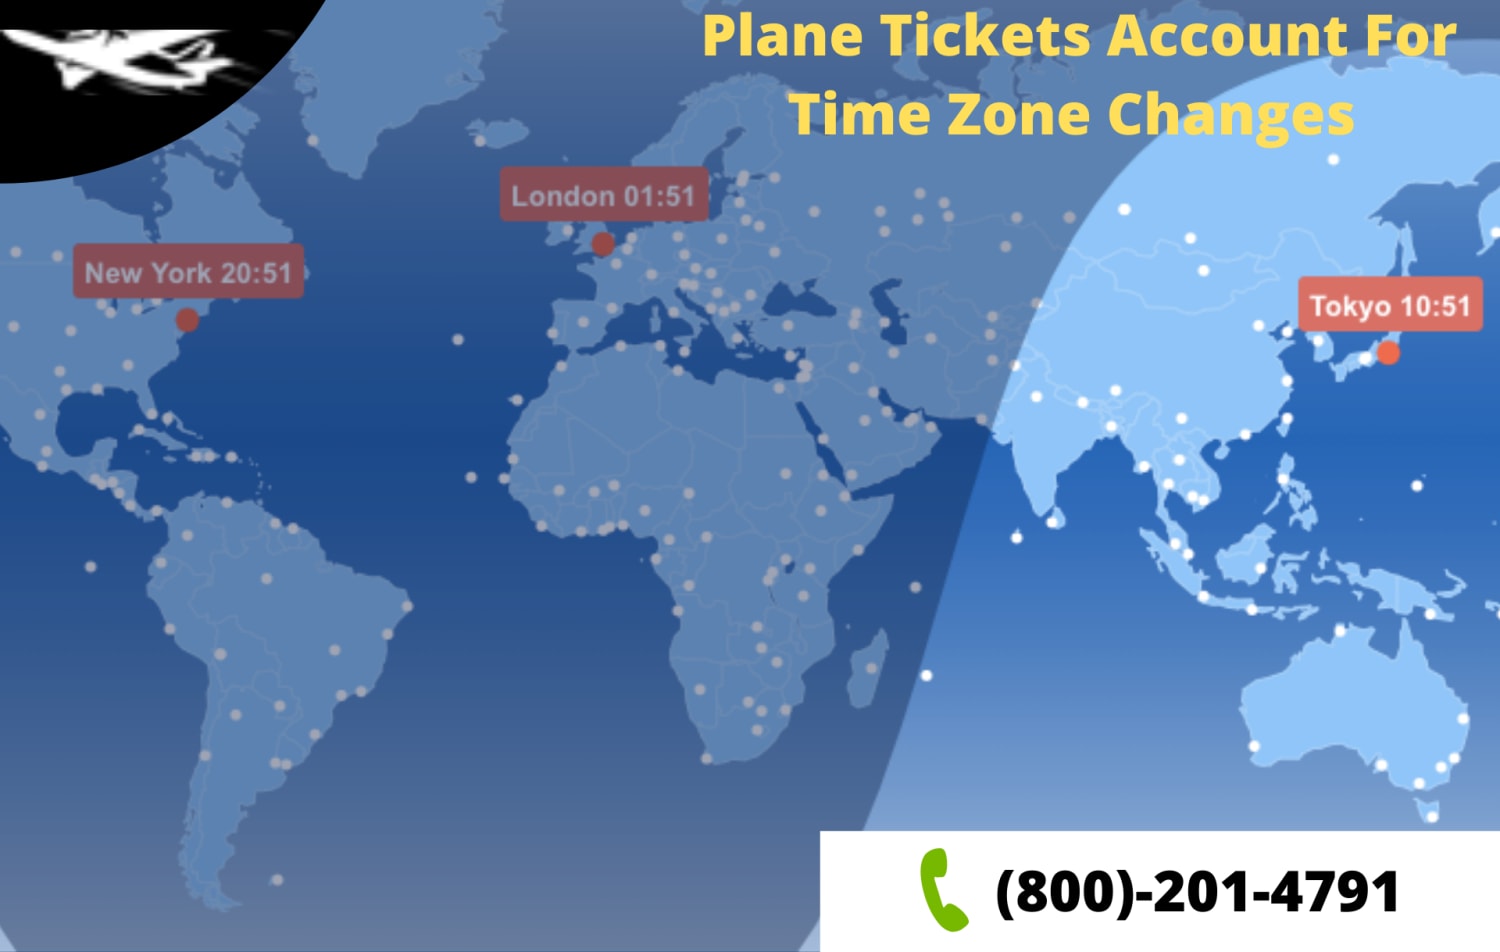 Do Plane Tickets Account For Time Zone Changes ?